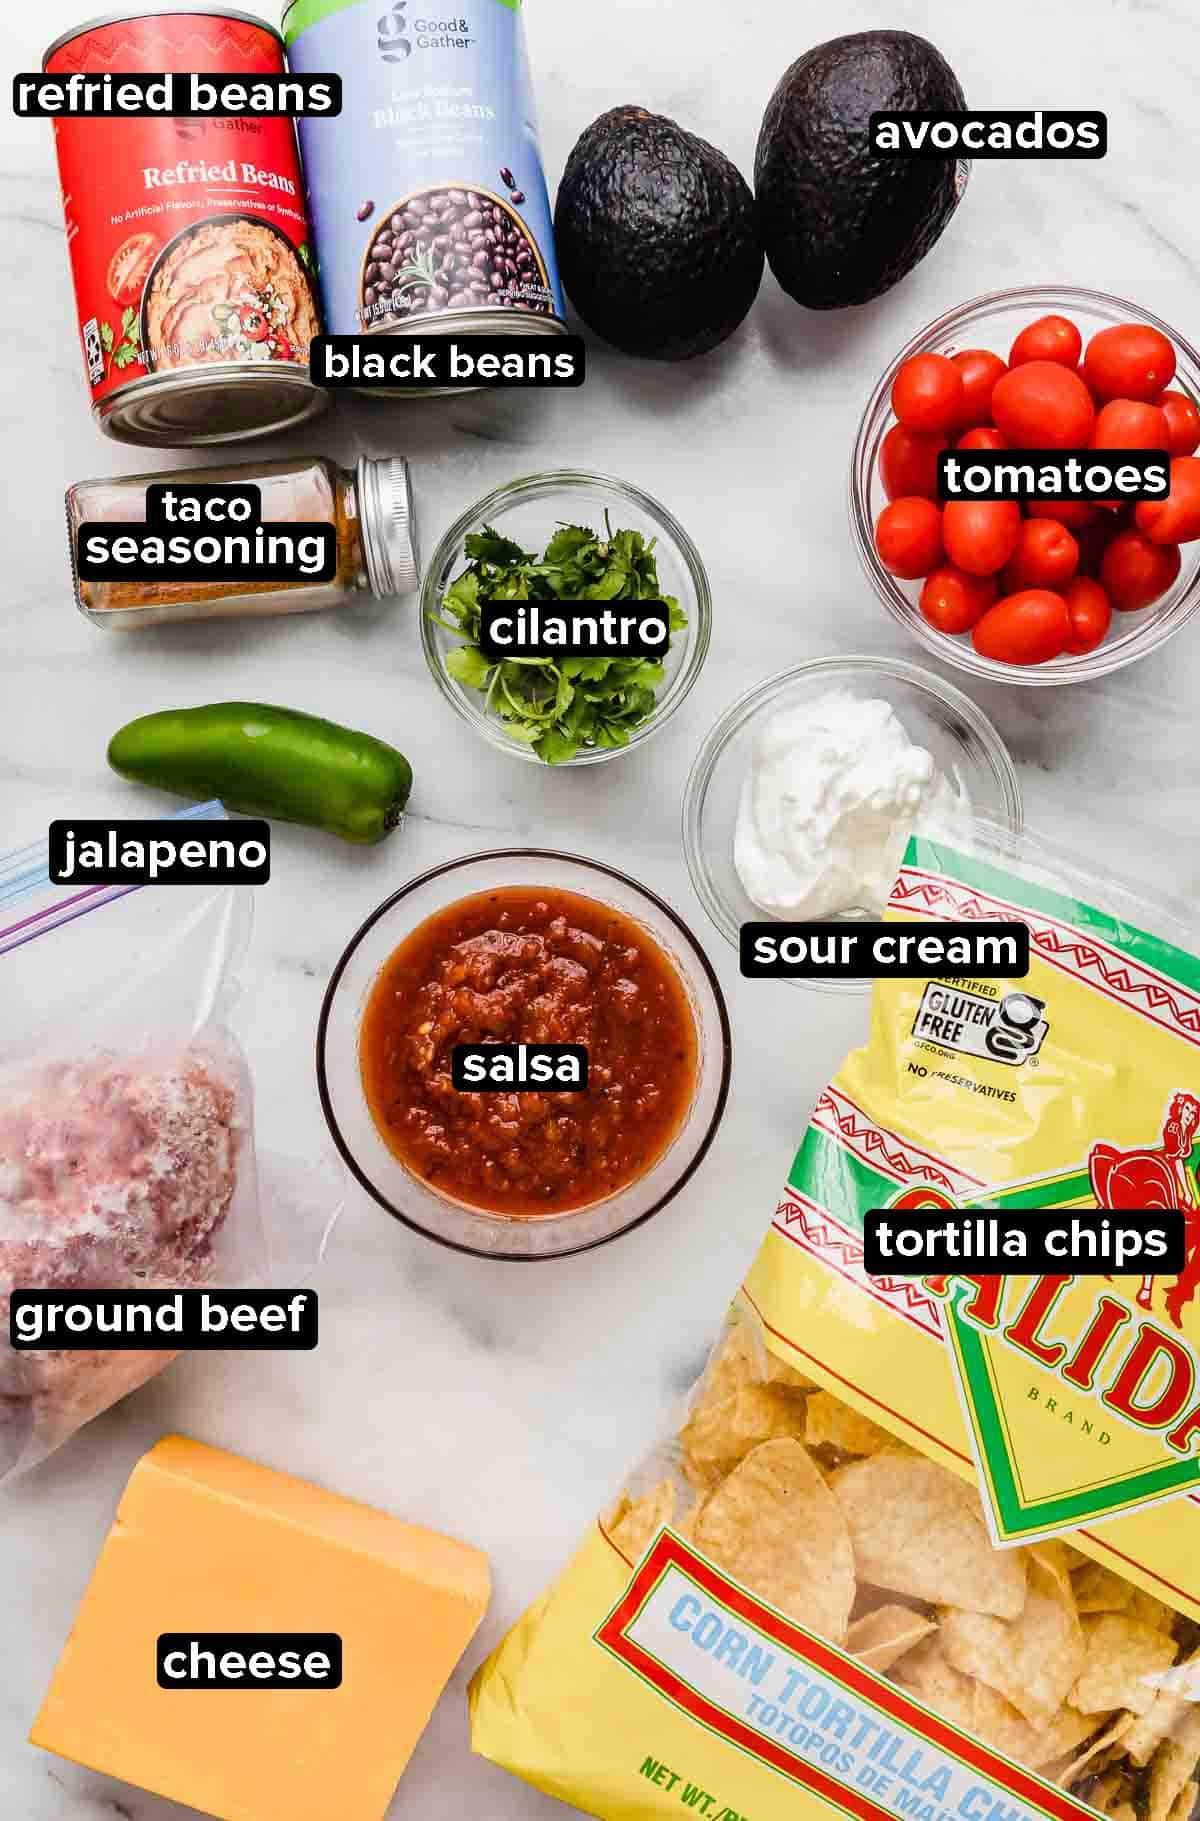 Beef Loaded Nachos ingredients on a white background including: tortilla chips, ground beef, tomatoes, jalapeño, refried beans, avocado, black beans, tomatoes, and cheese.